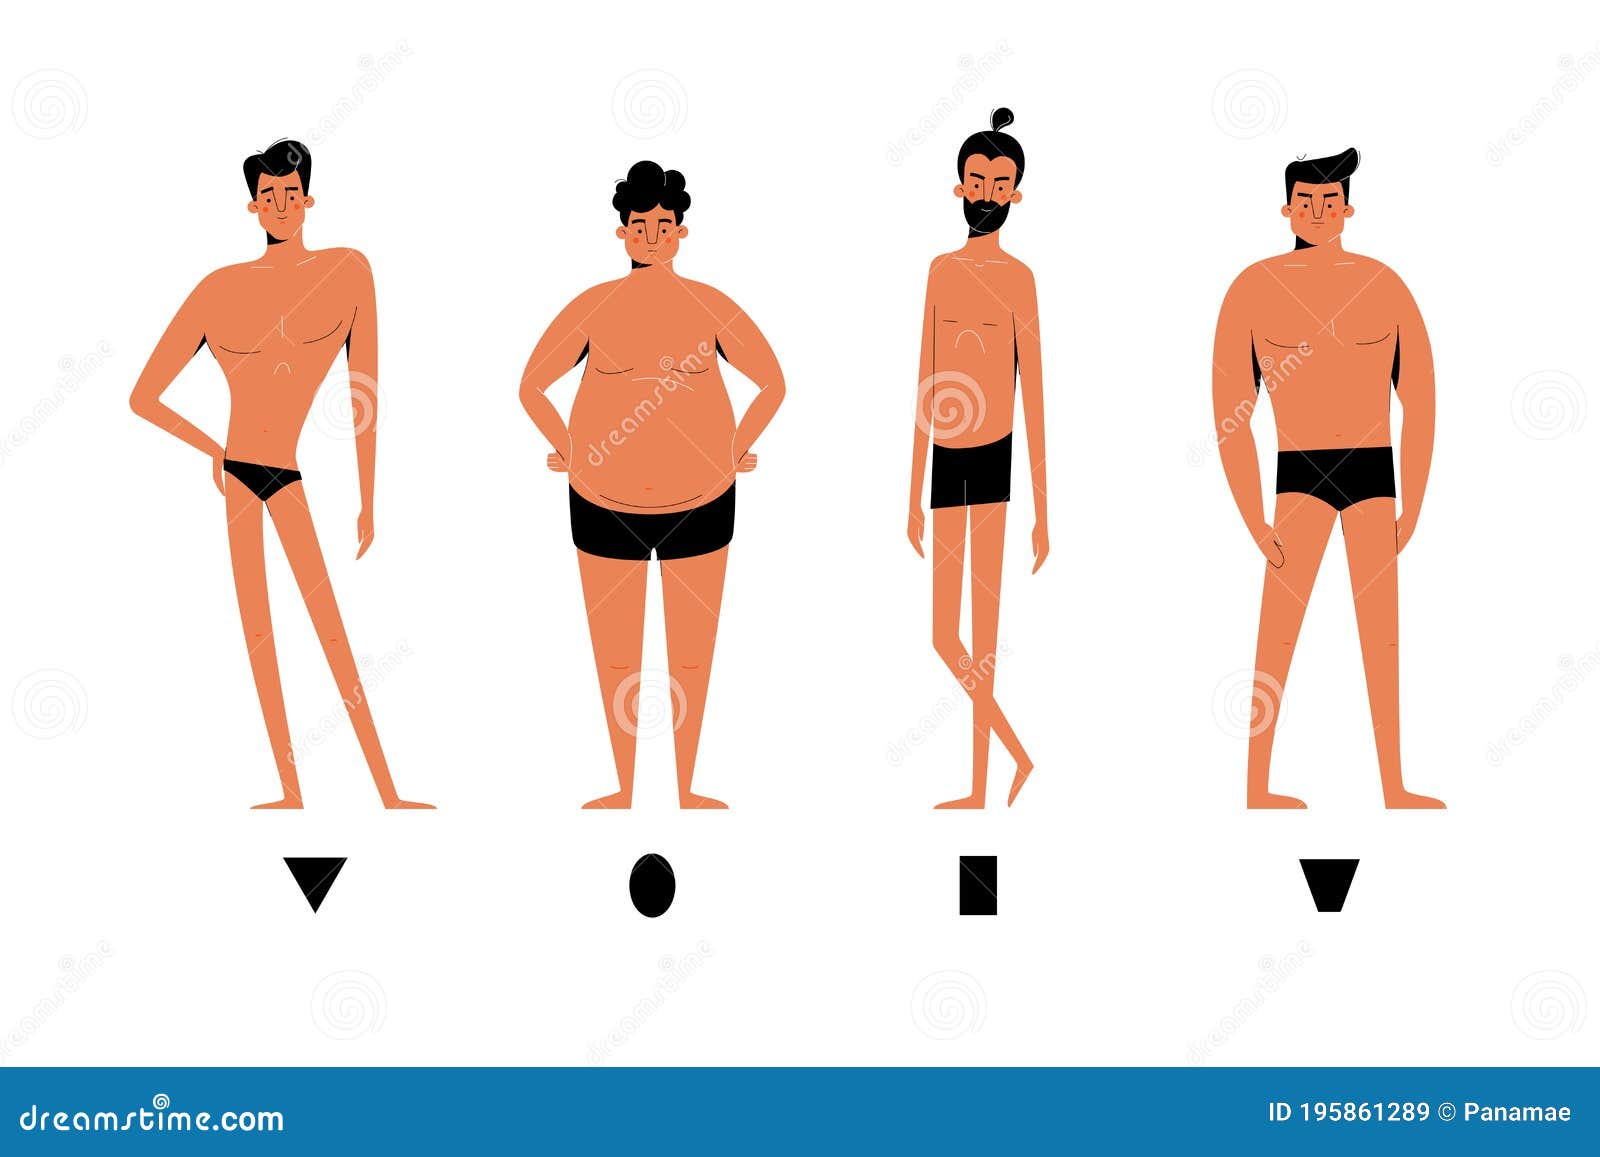 https://thumbs.dreamstime.com/z/male-body-shapes-set-inverted-triangle-oval-rectangle-rhomboid-figure-types-human-anatomy-cartoon-collection-isolated-white-man-195861289.jpg